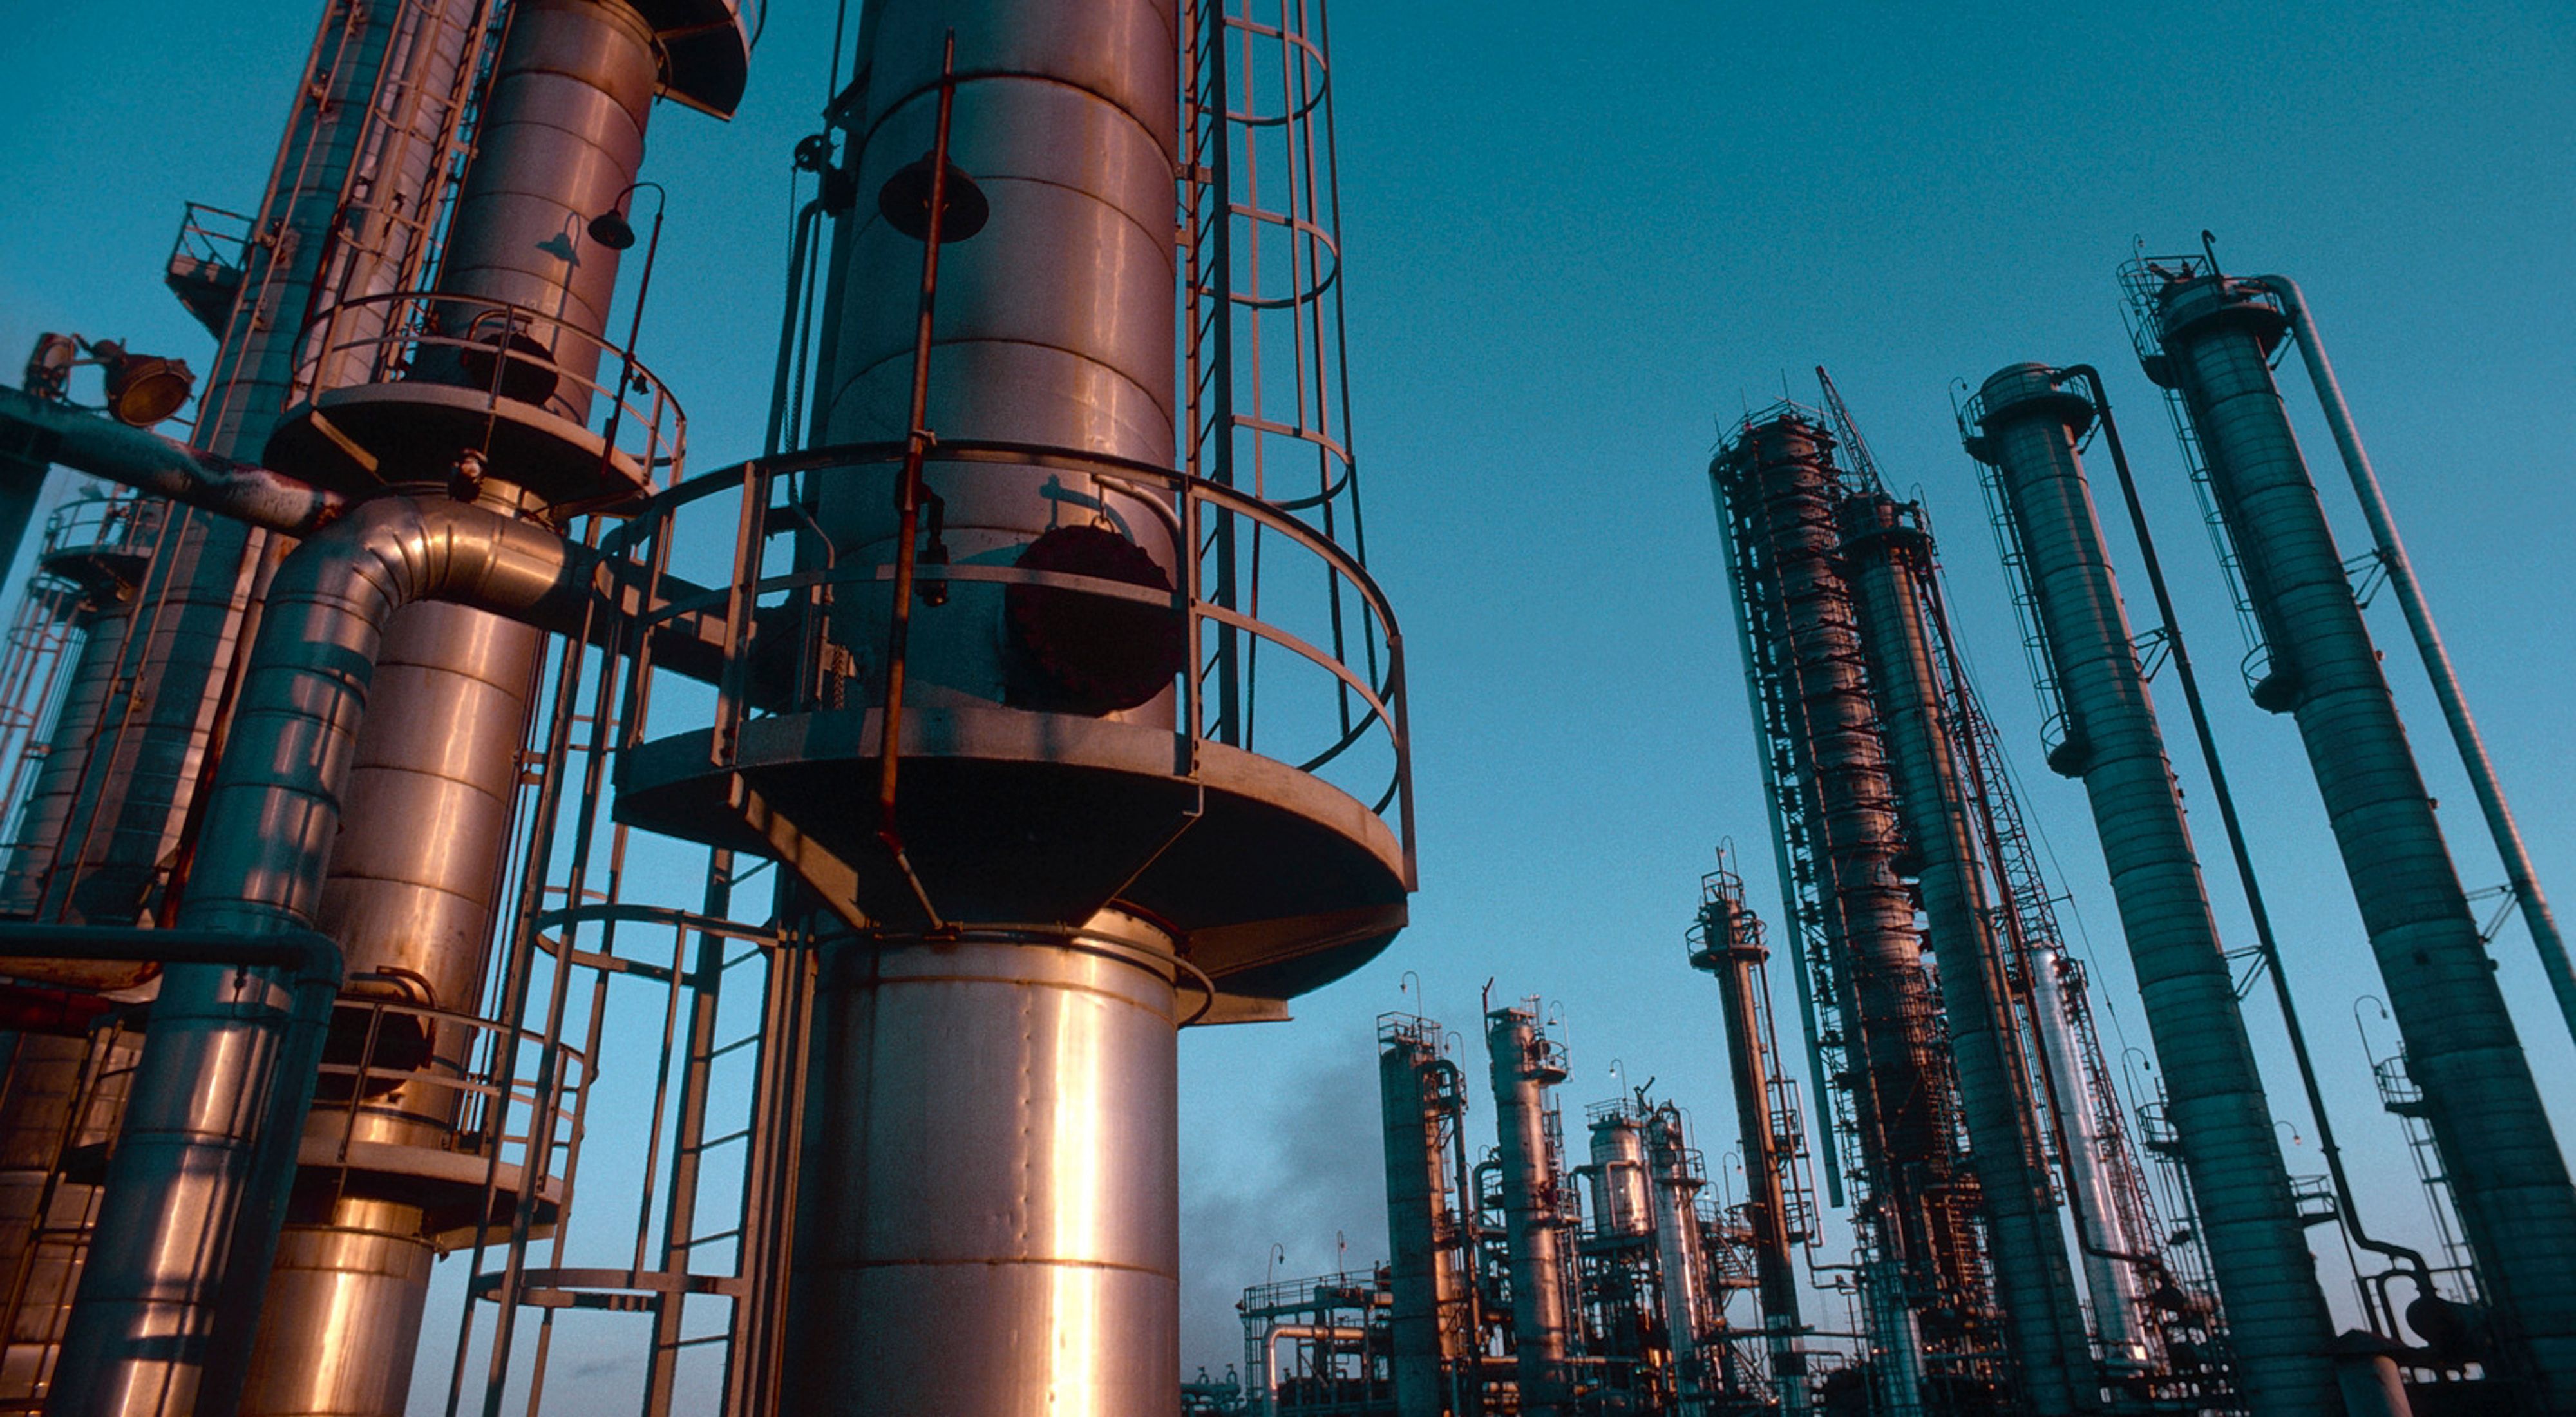 Photo of an oil refinery, with pipes and metal infrastructure.